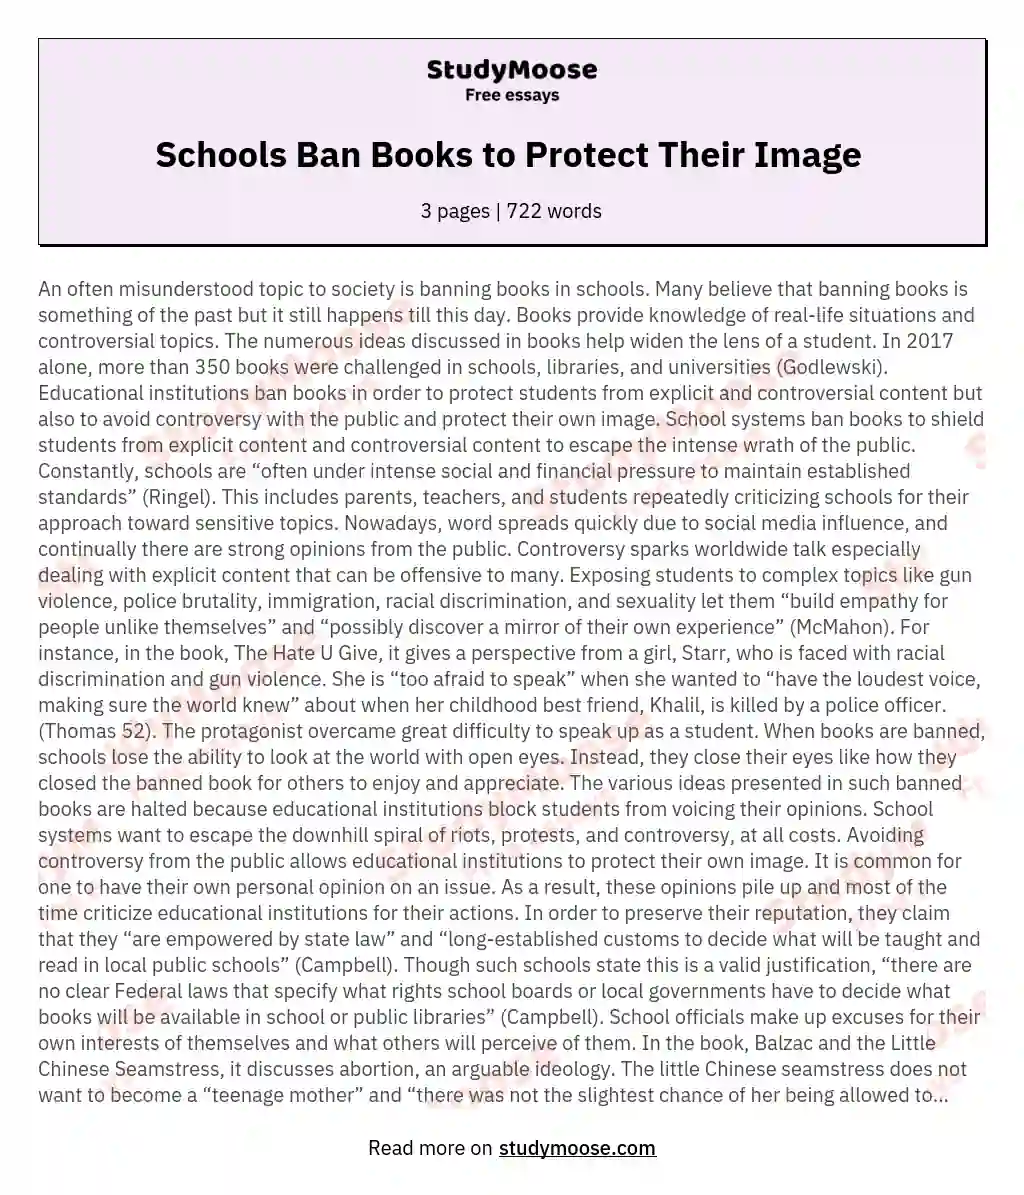 Schools Ban Books to Protect Their Image  essay